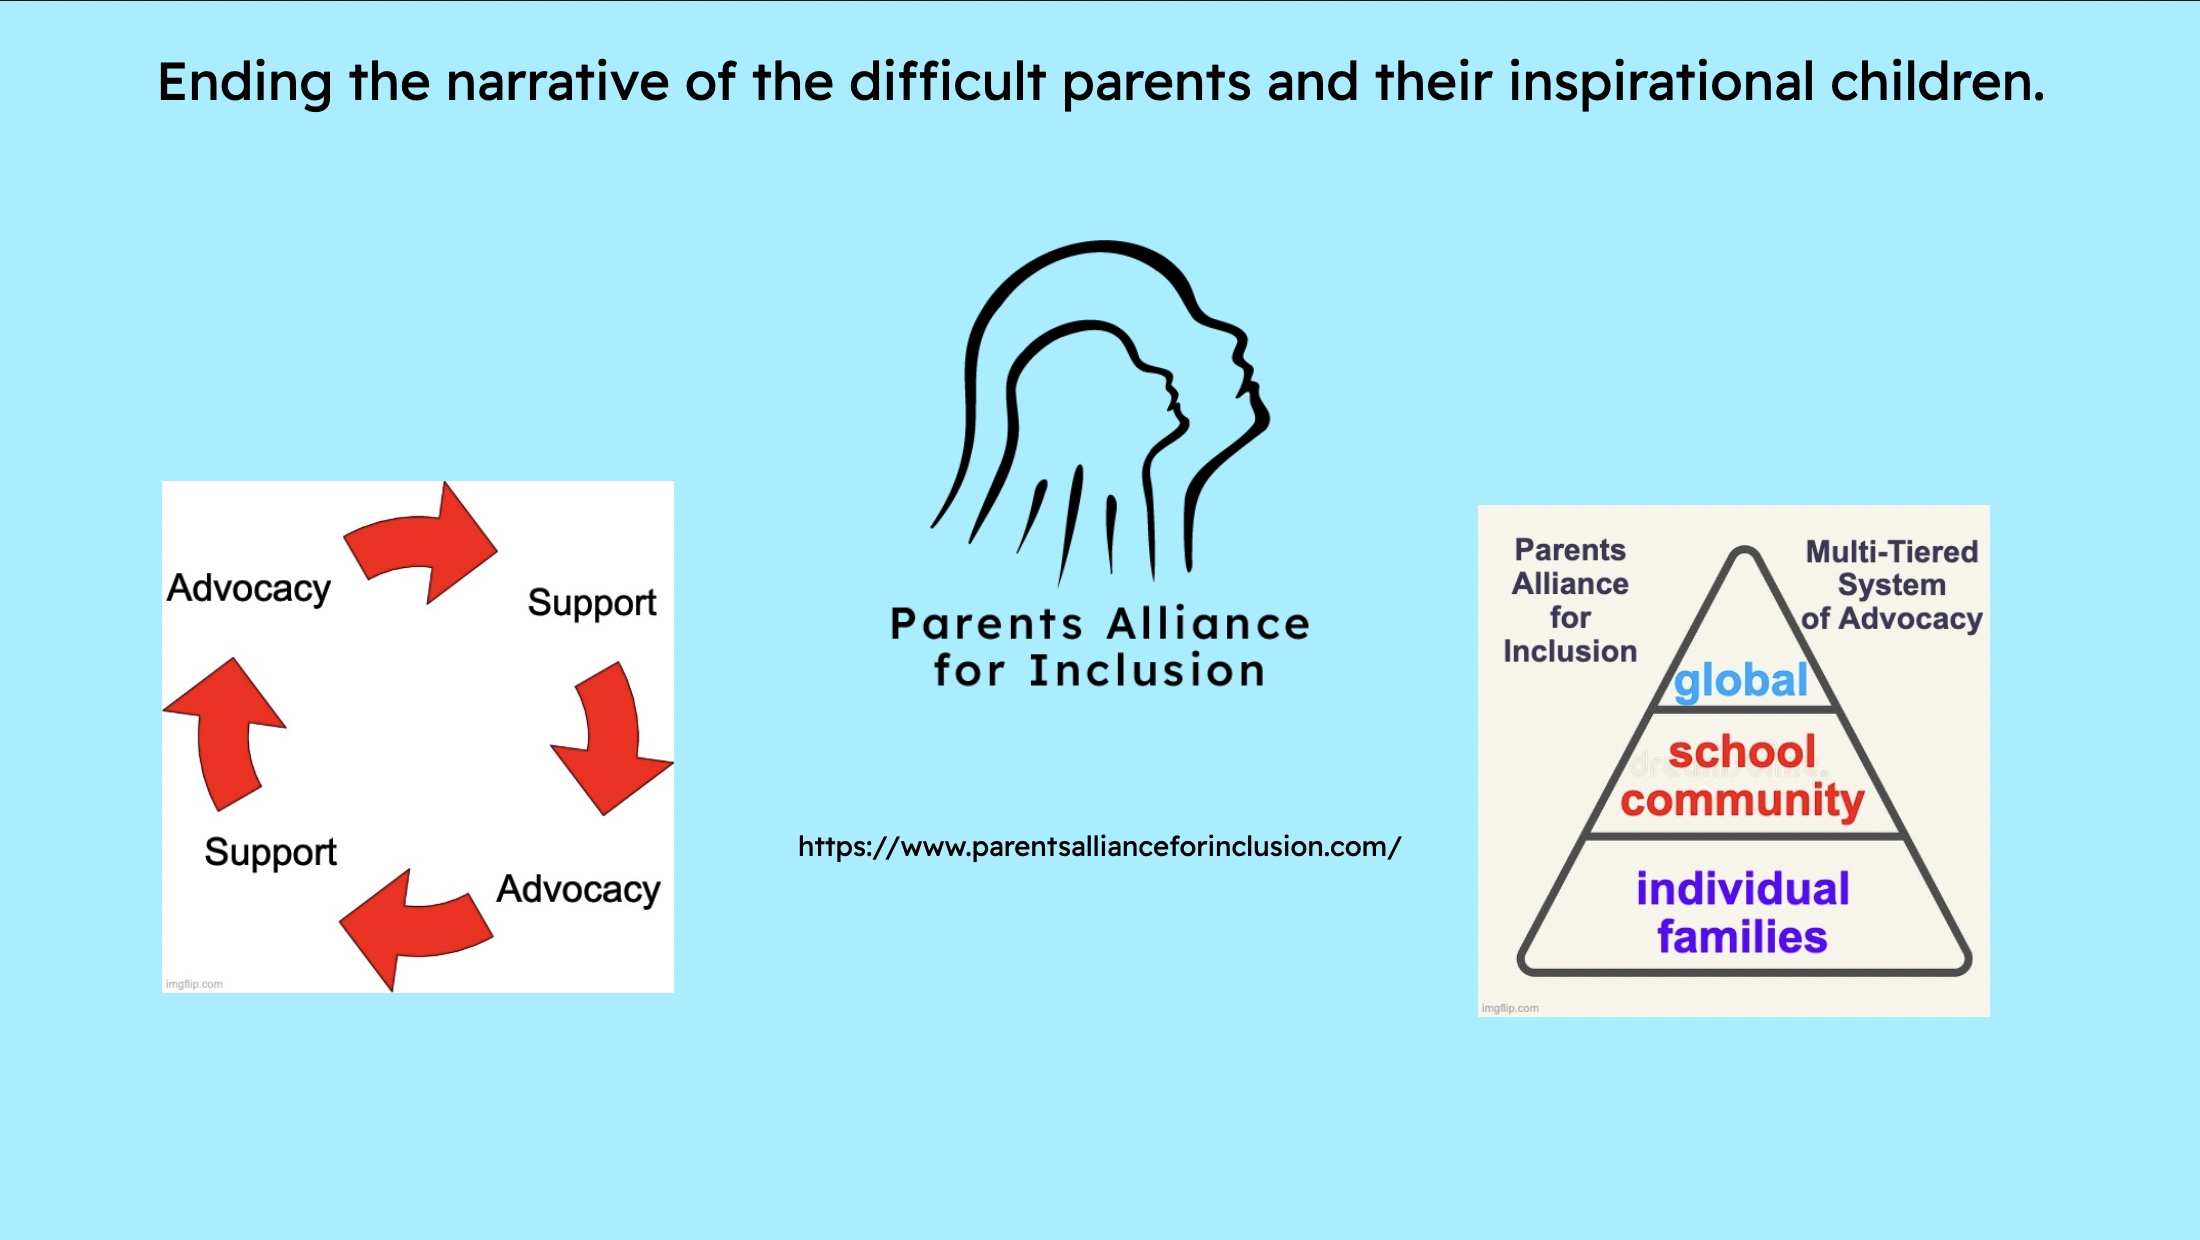 Slide titled "Ending the narrative of the difficult parents and their inspirational children." 3 images. Image 1, 4 arrows in a circle with the words "advocacy" and "support" alternating between arrows. Image 2, Parents Alliance for Inclusion logo and website link. Image 3, triangle displaying "Multi-Tiered System of Advocacy" with "individual families" at the base, "school community" in the middle, and "global" at the top.